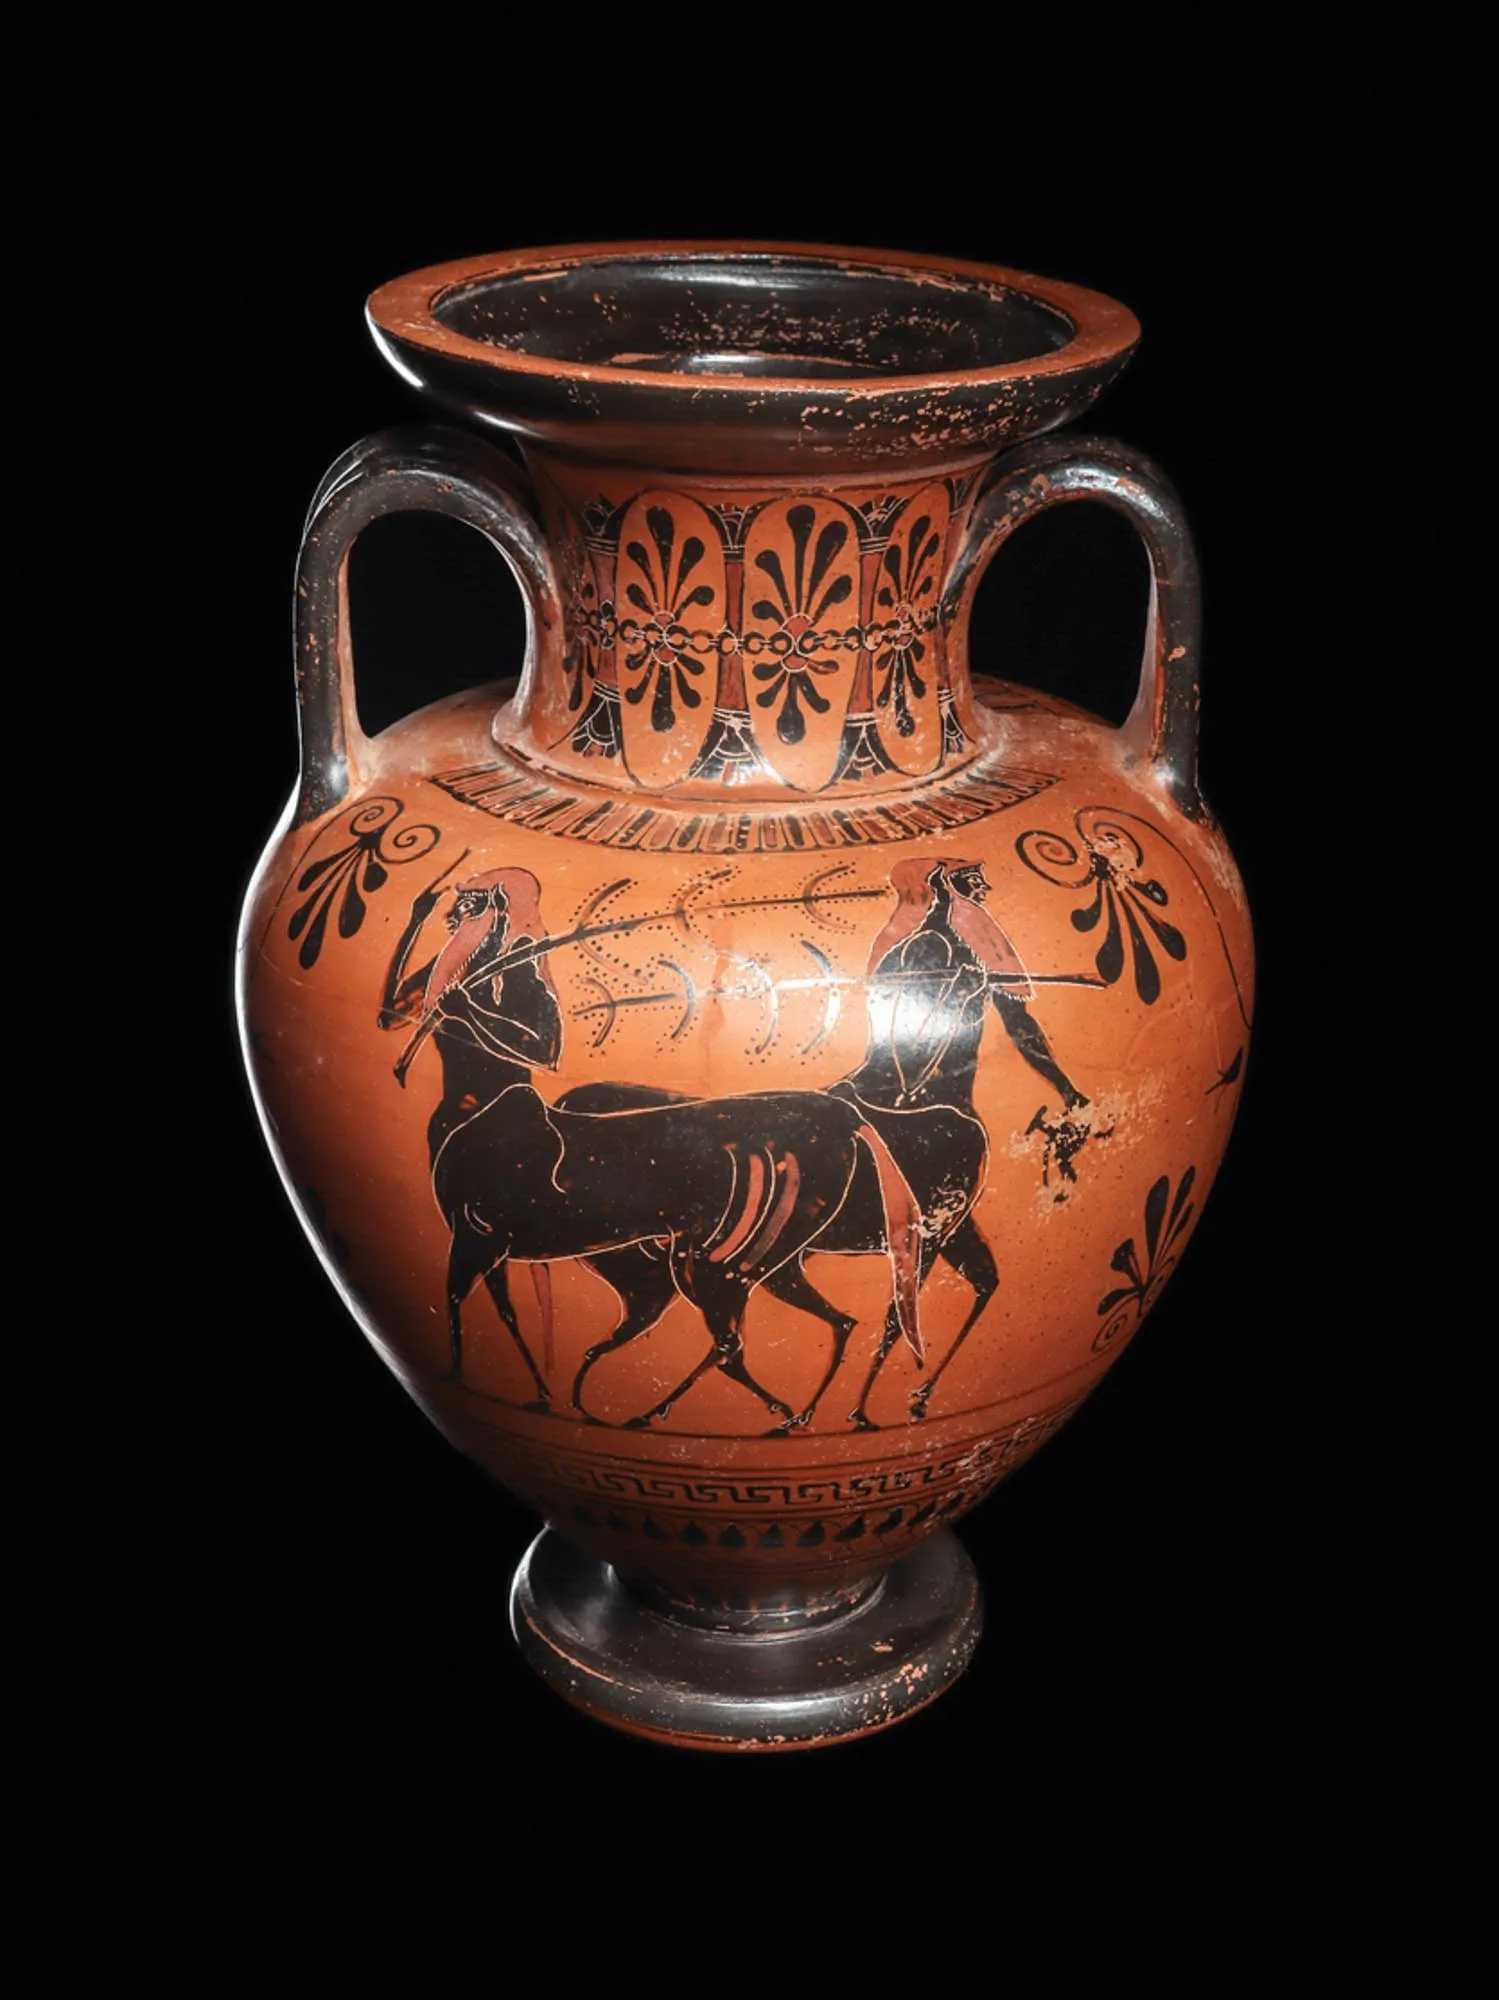 Black-figure amphora attributed to the Antimenes Painter, estimated at £45,000-£90,000 ($56,860-$113,720) at Apollo Art Auctions April 27.